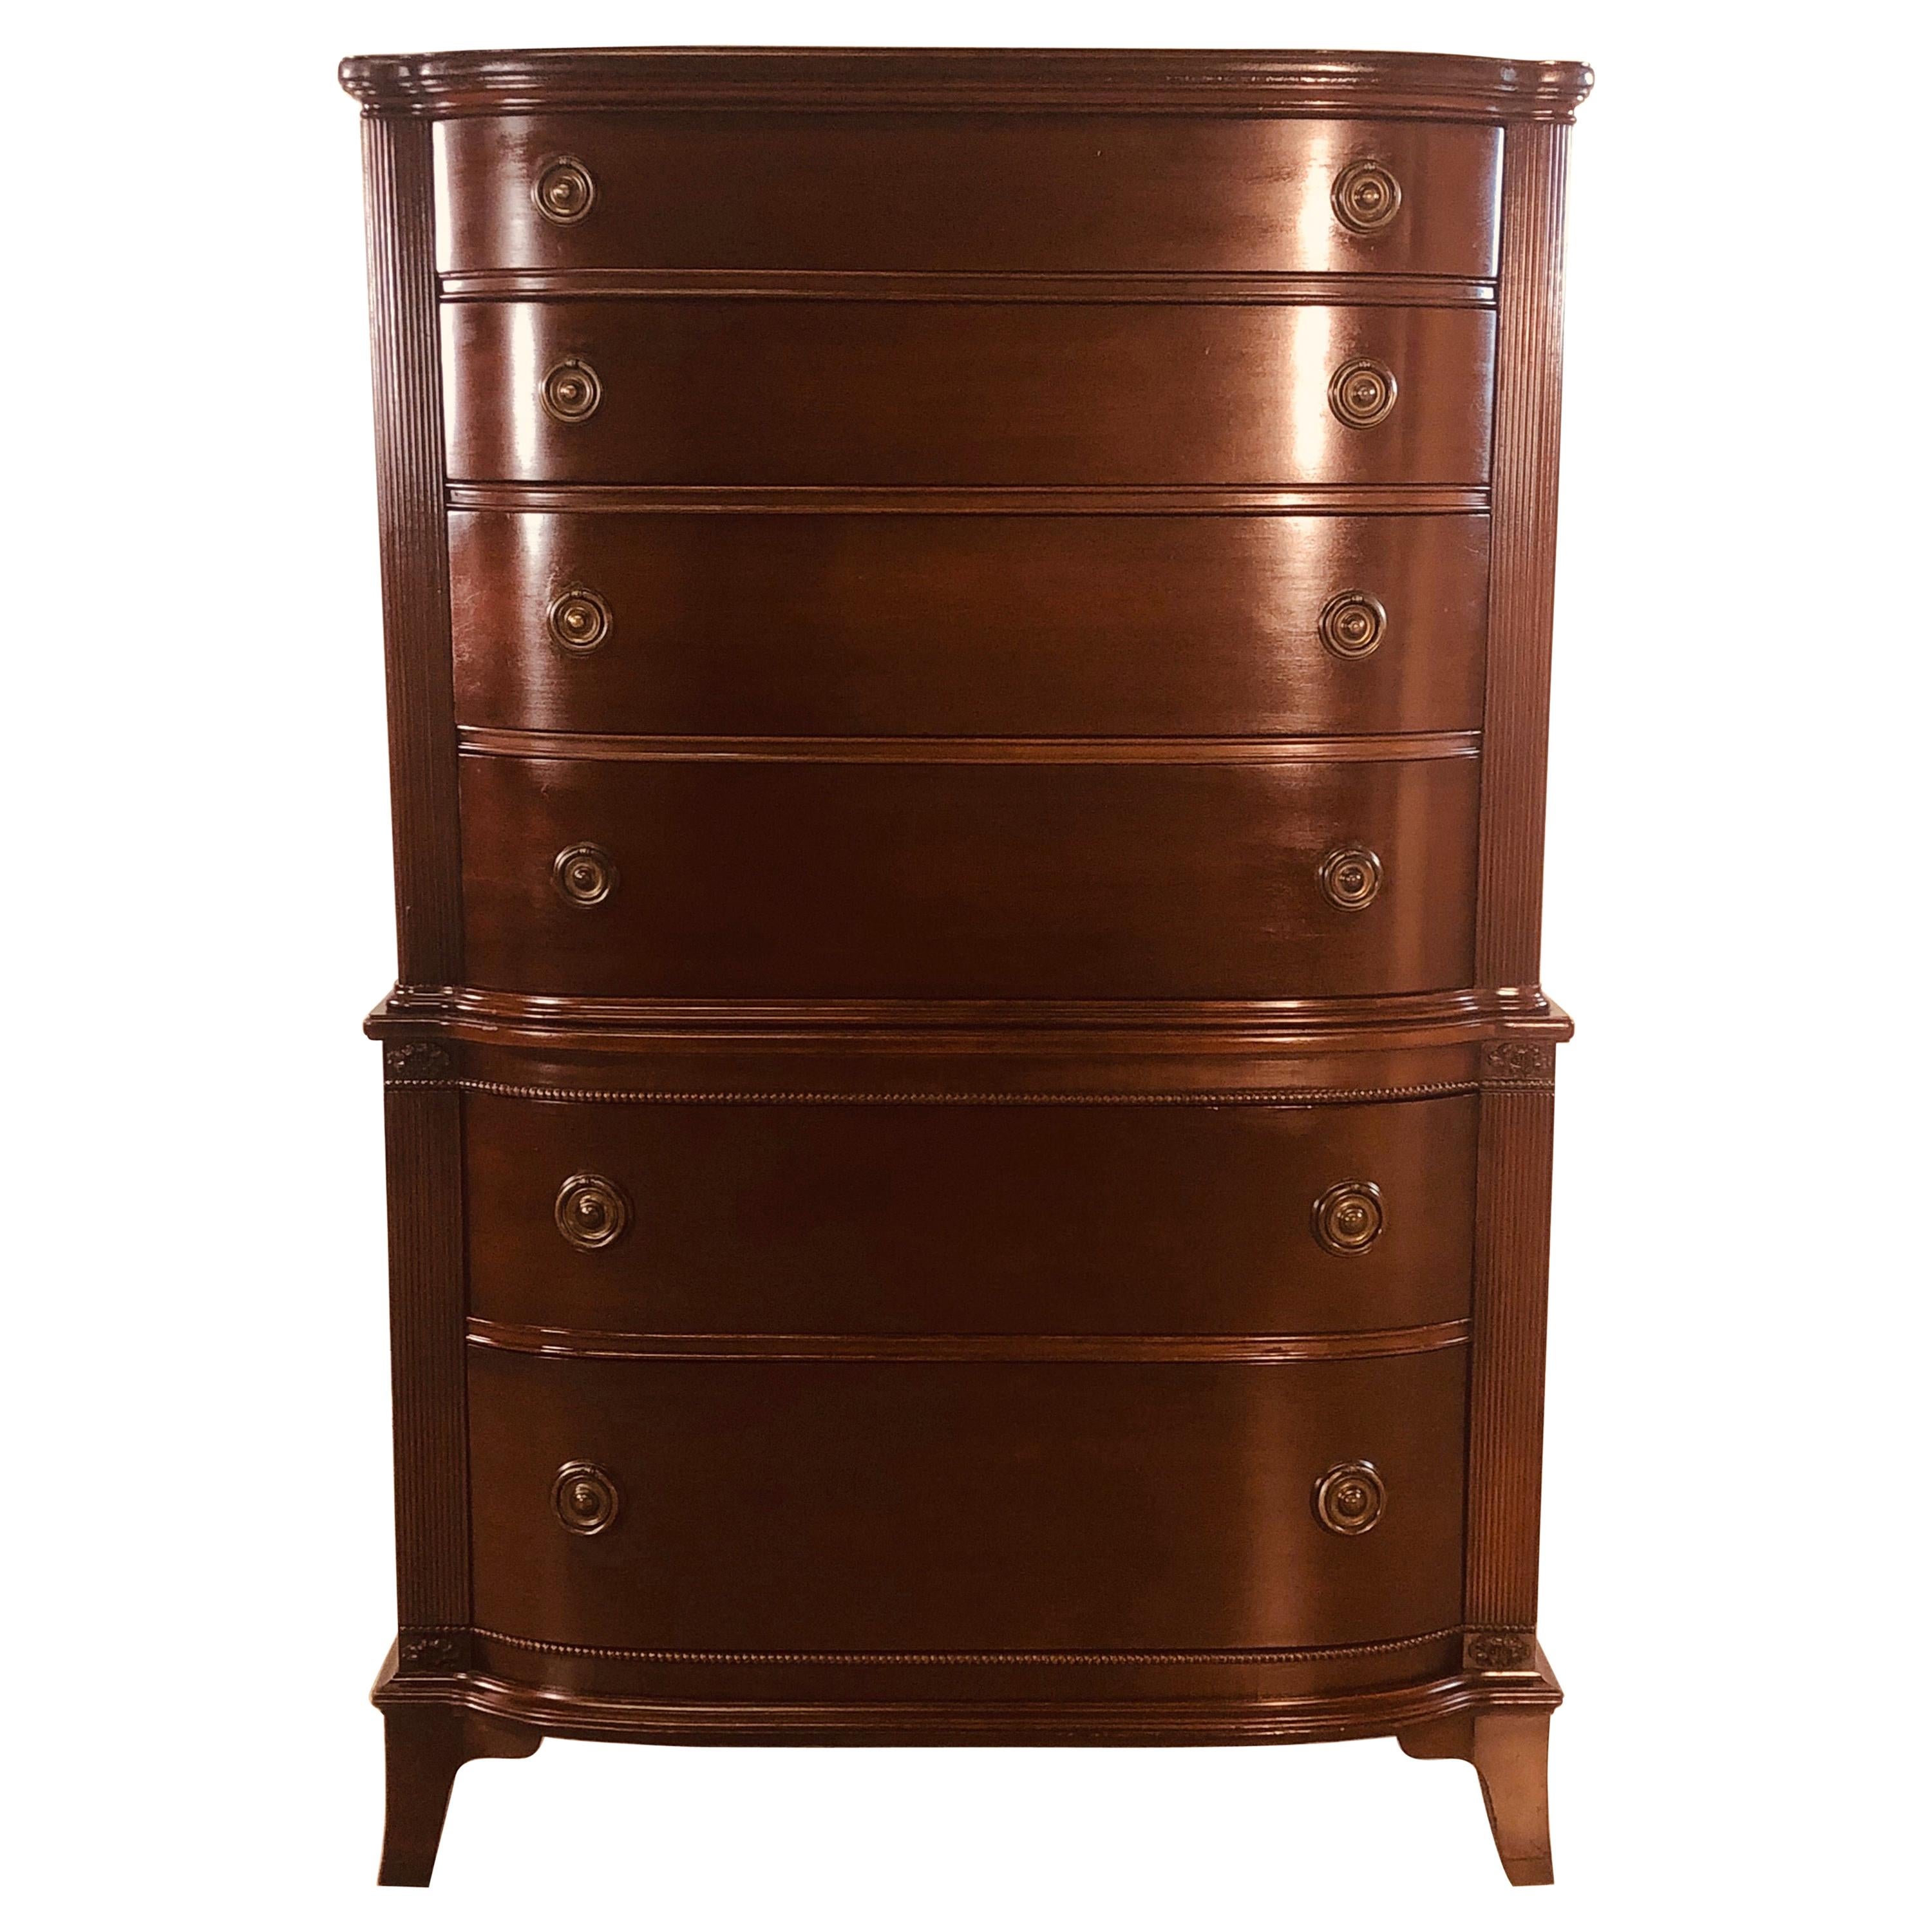 Vintage Mahogany Curved Front Federal Style Tall Dresser